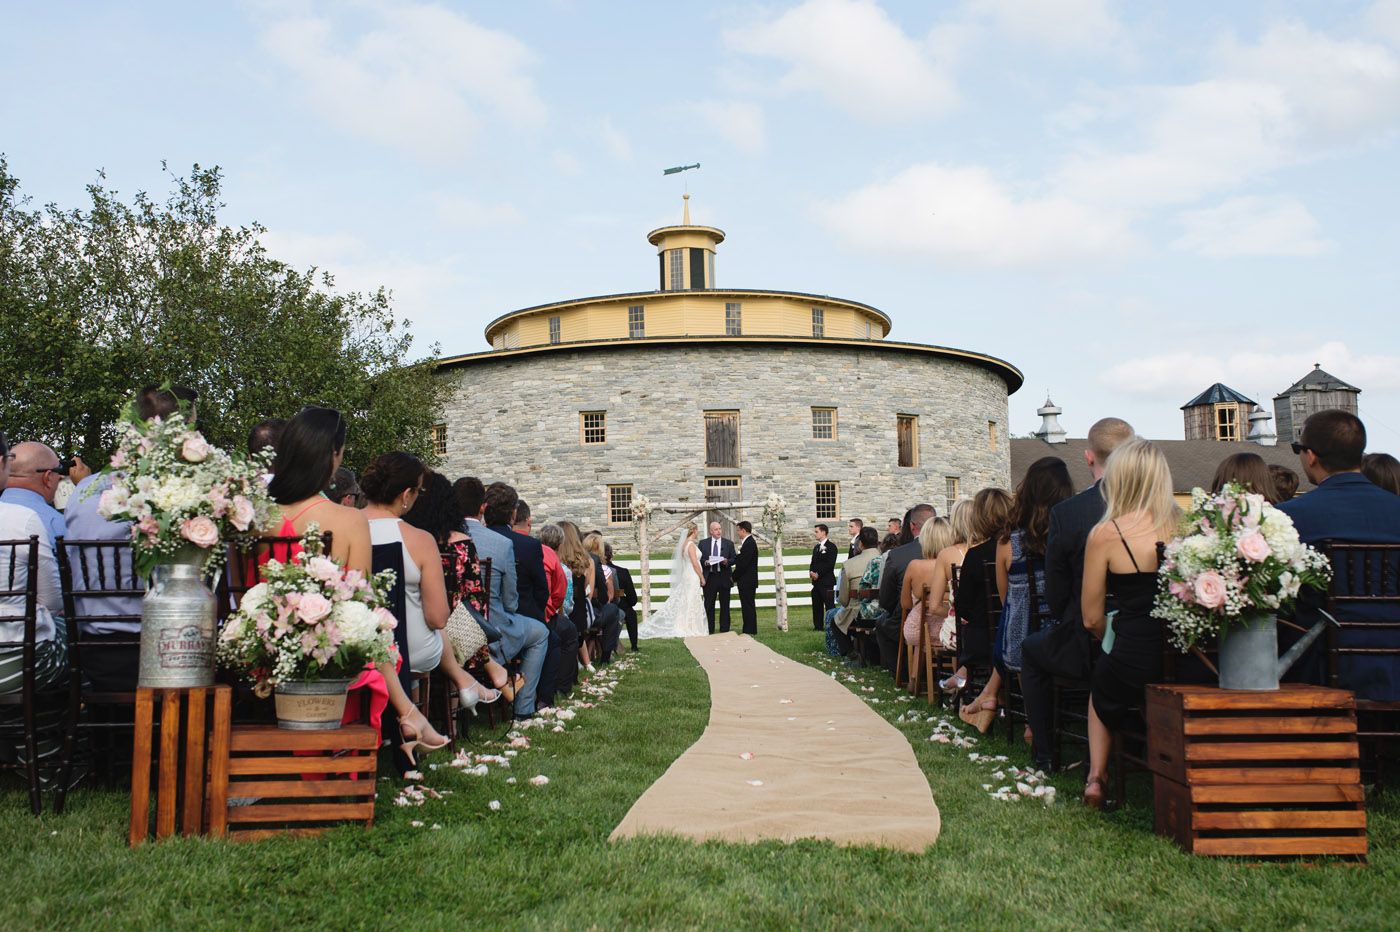 Wedding Images in The Berkshires | Casey Dawn Photography